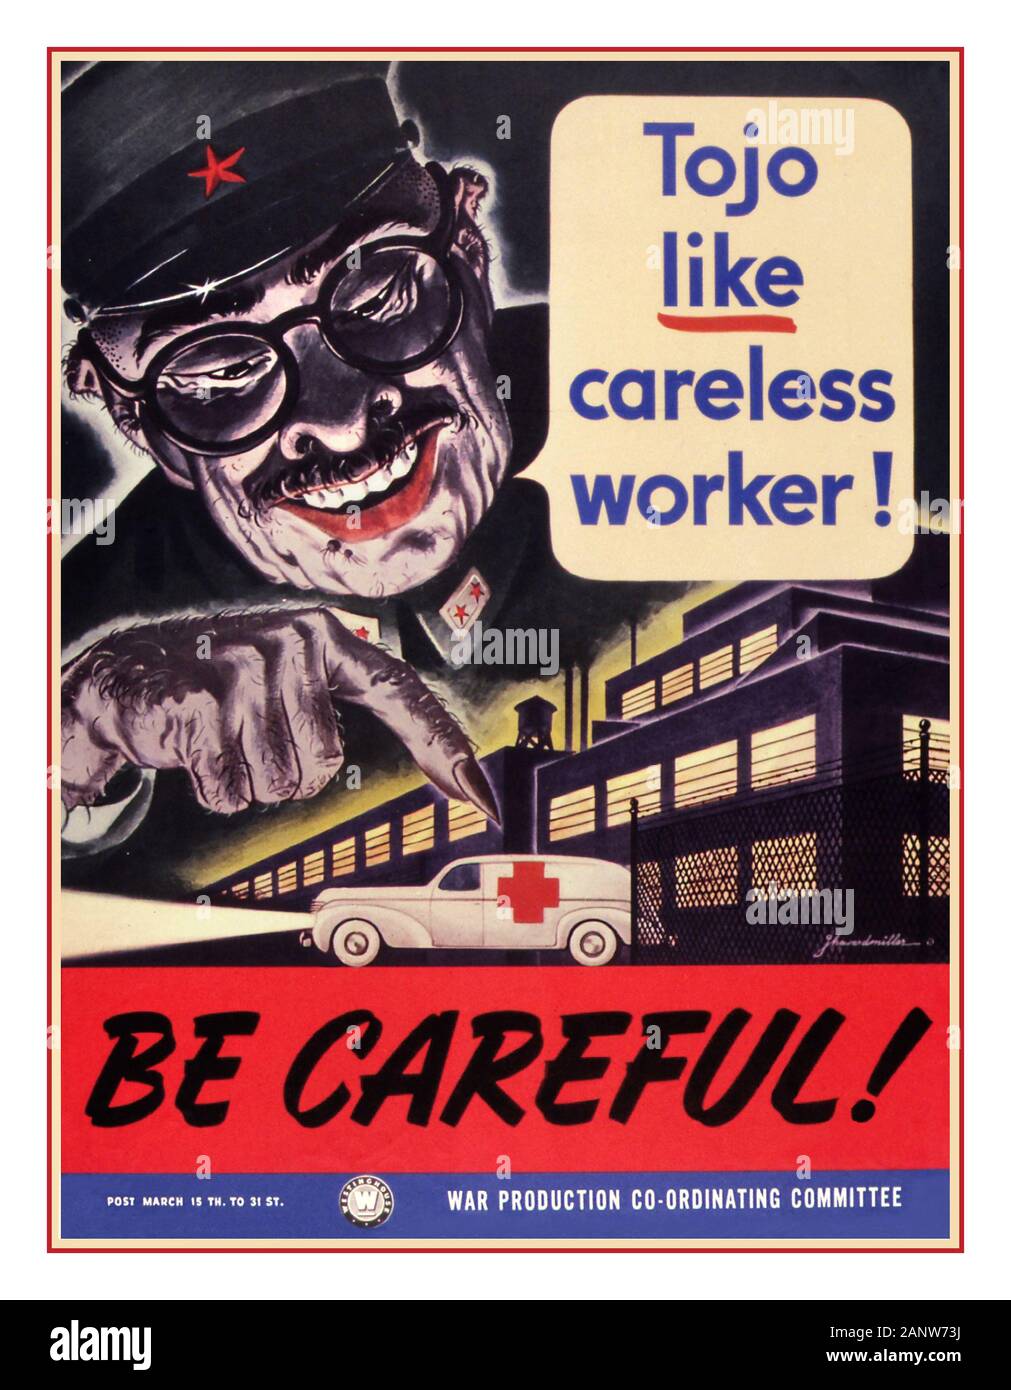 Vintage WW2 Propaganda War Production 1940’s American Poster of an ambulance leaving a factory, while a huge cartoon figure of Japan’s General Tojo looms in the background, with headline ‘Tojo like careless worker’ ! ‘BE CAREFUL’  produced by War Production Co-ordinating Committee USA World War II Second World War Artist J. Howard Miller Stock Photo